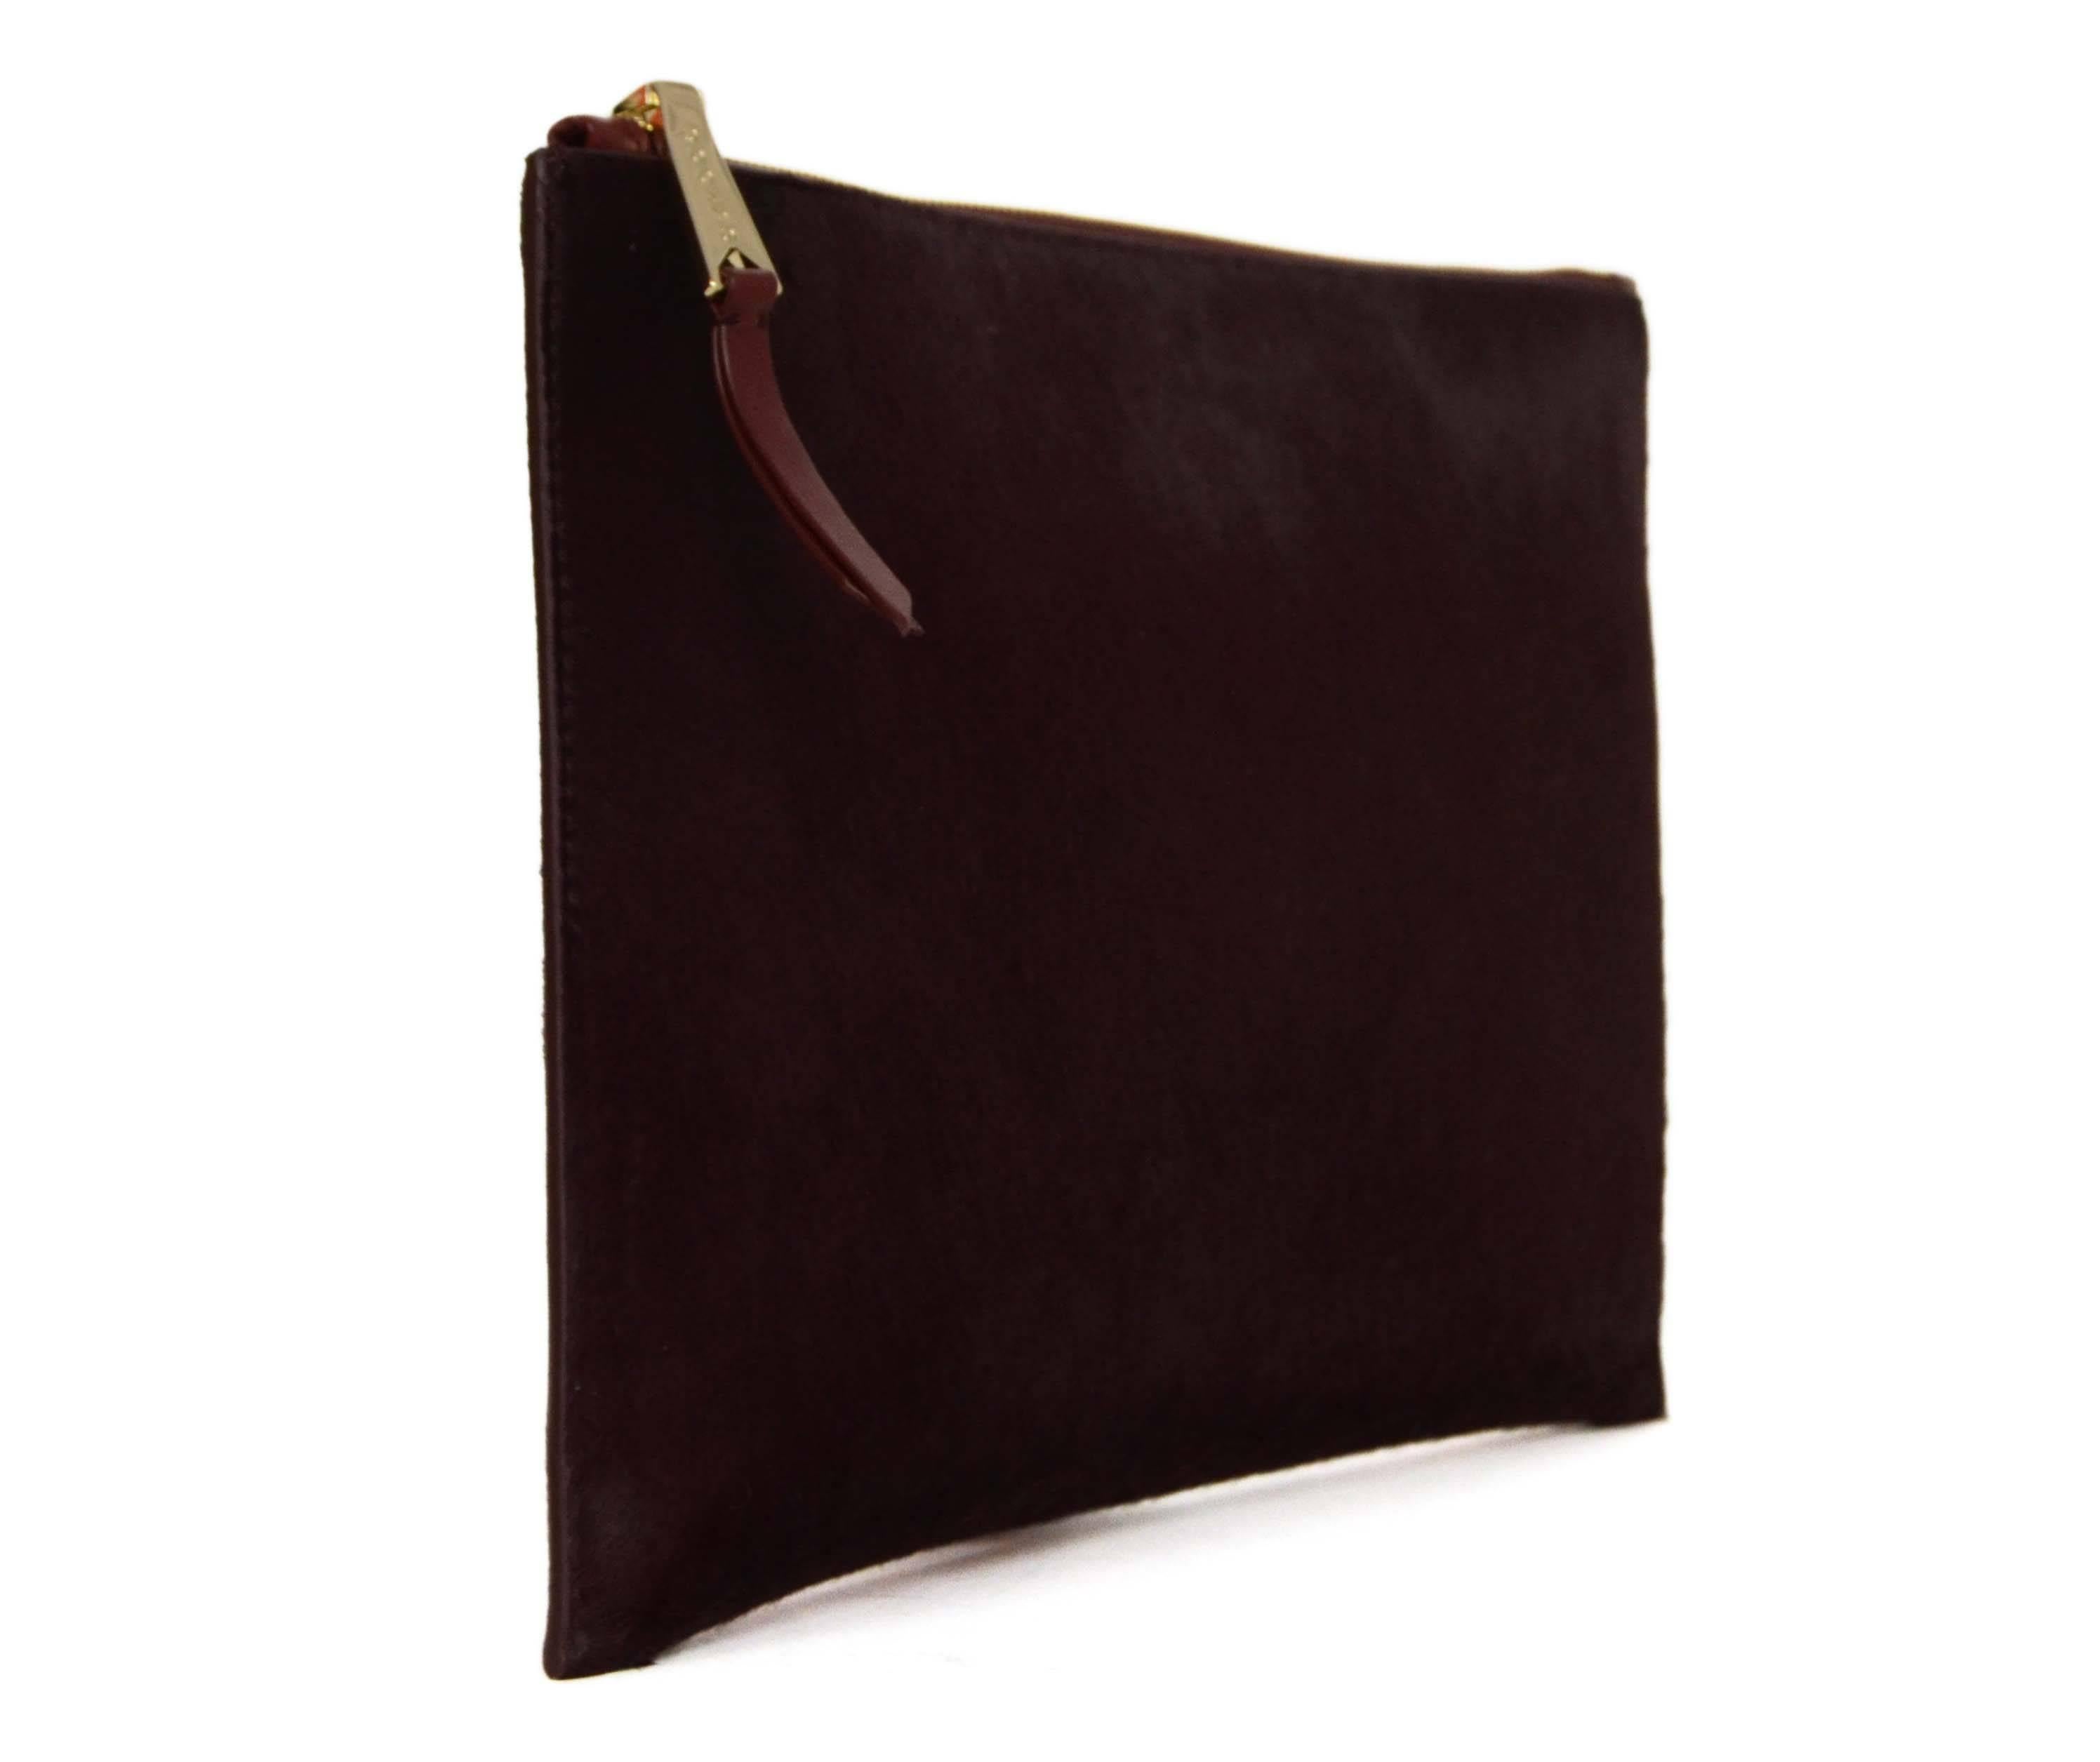 Rochas Burgundy Ponyhair Clutch 
Made In: Italy
Color: Burgundy
Hardware: Goldtone
Materials: Ponyhair
Lining: Black leather
Closure/Opening: Zip across closure
Exterior Pockets: None
Interior Pockets: None
Overall Condition: